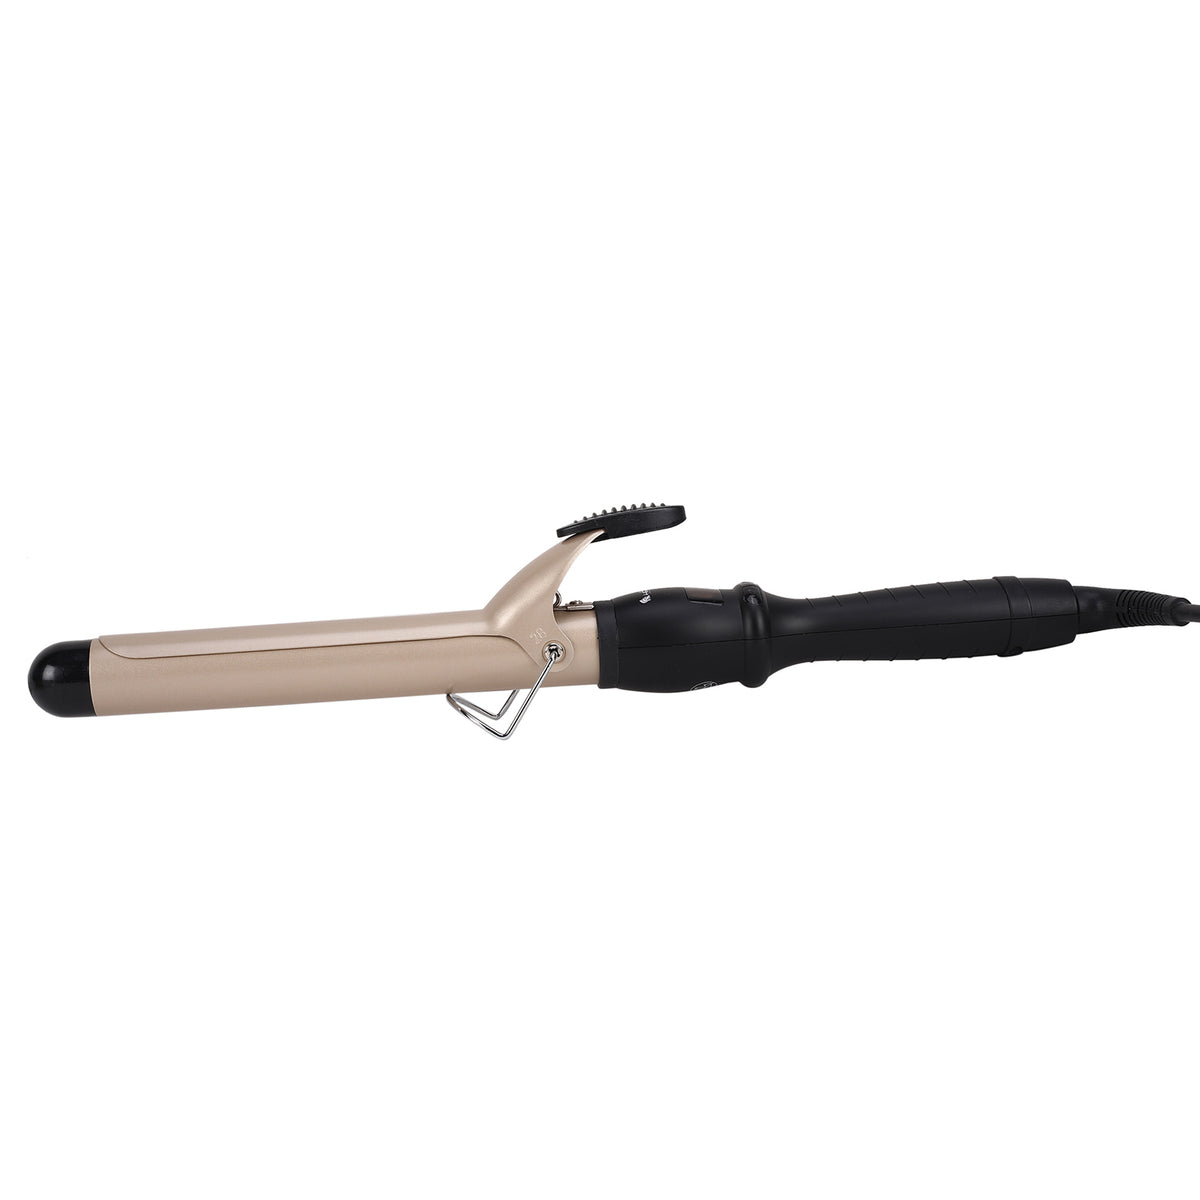 Hector Professional Rotating Curling Iron (Tong) 32 MM